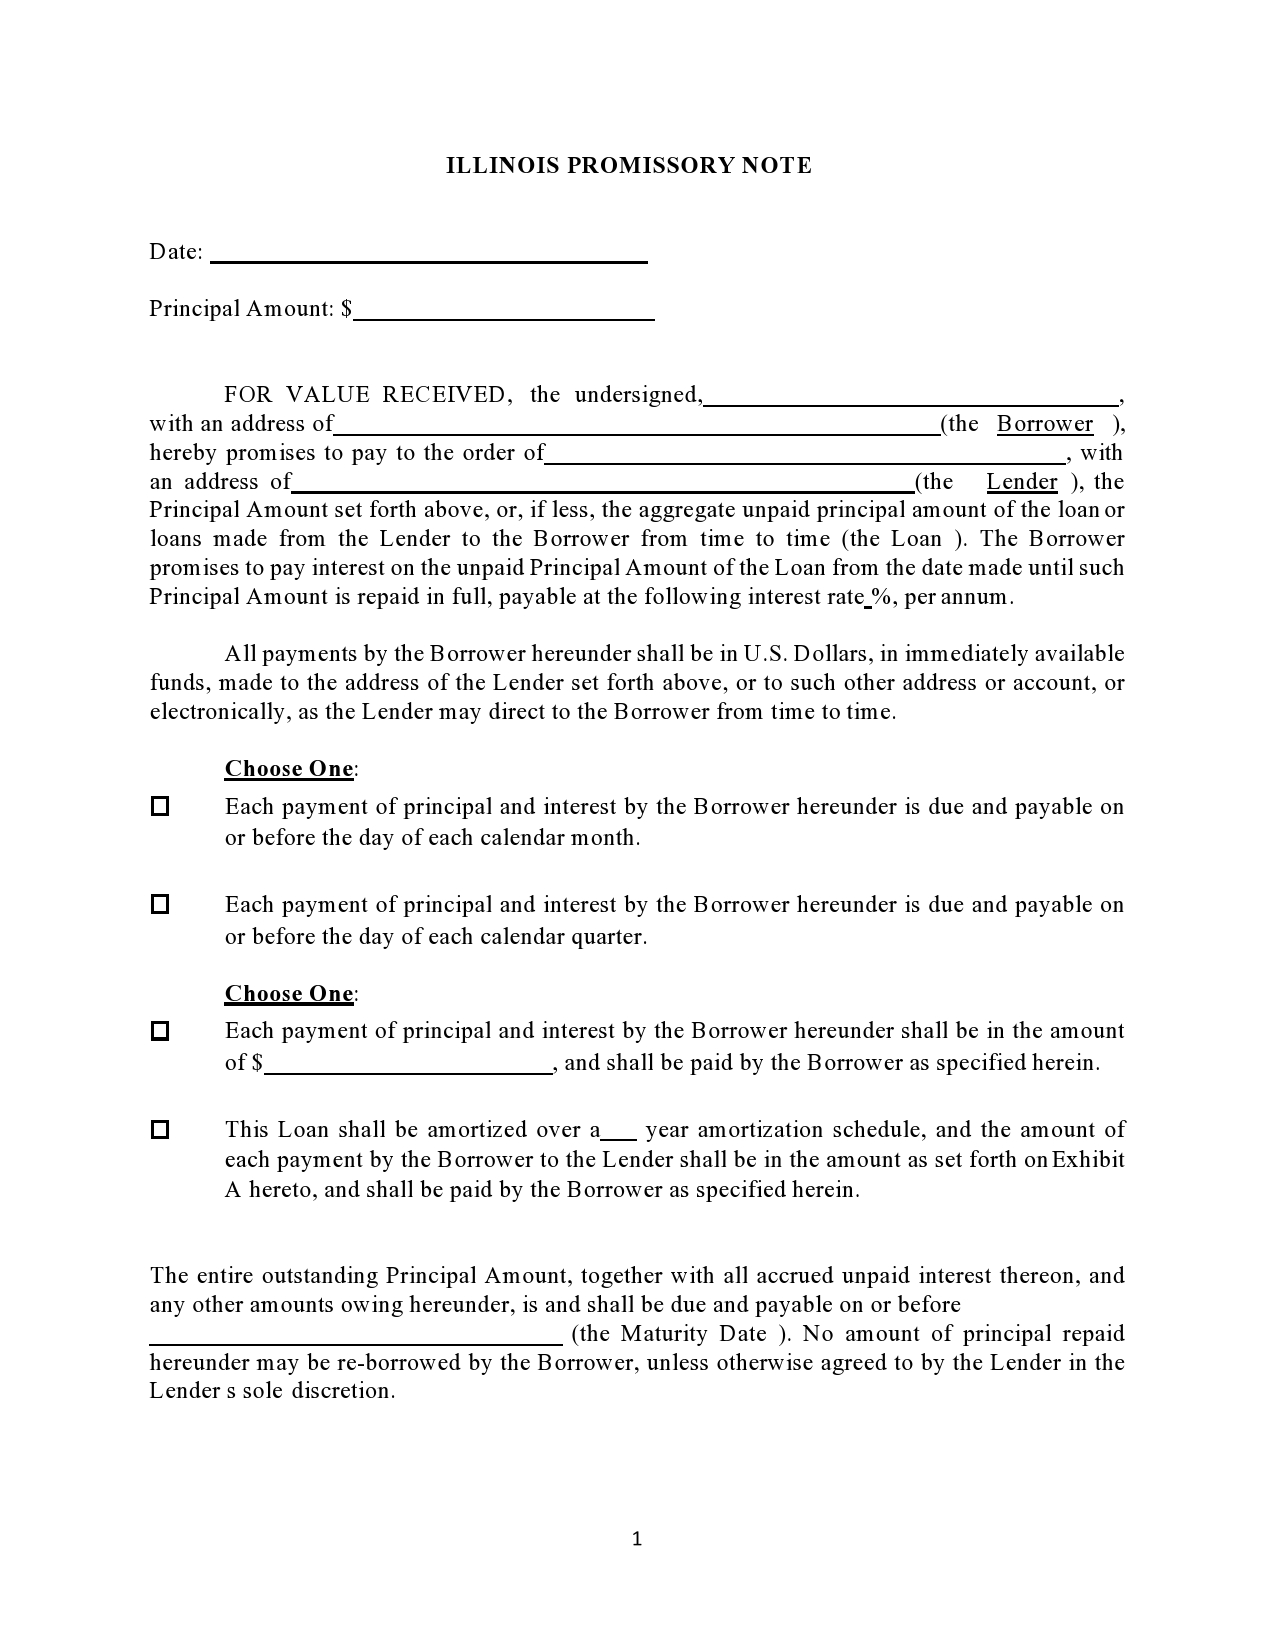 Free promissory note template 40